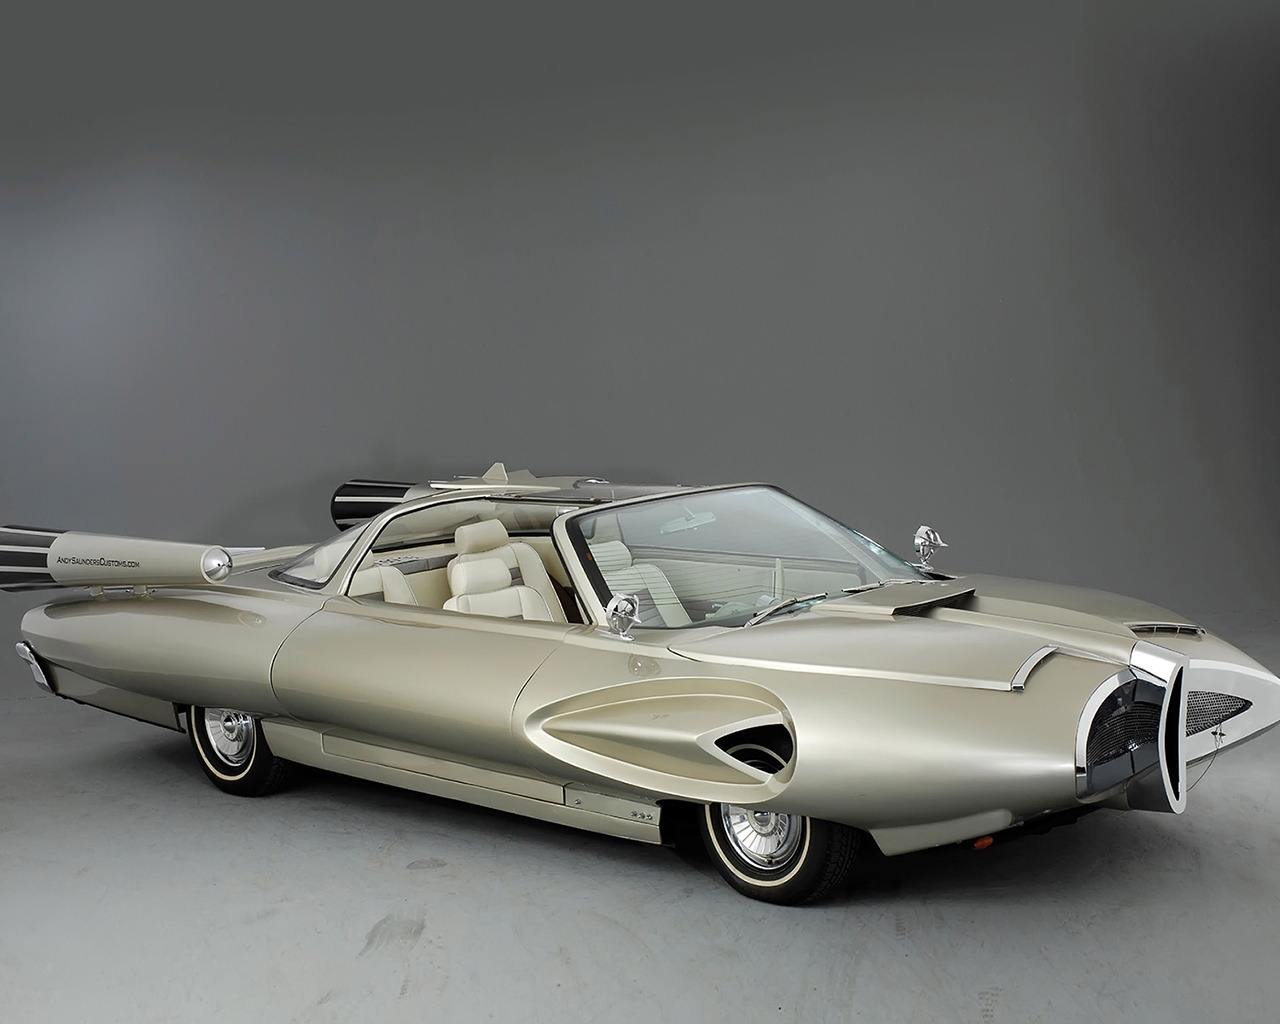 Ford X 2000 Concept Car 1958 for 1280 x 1024 resolution